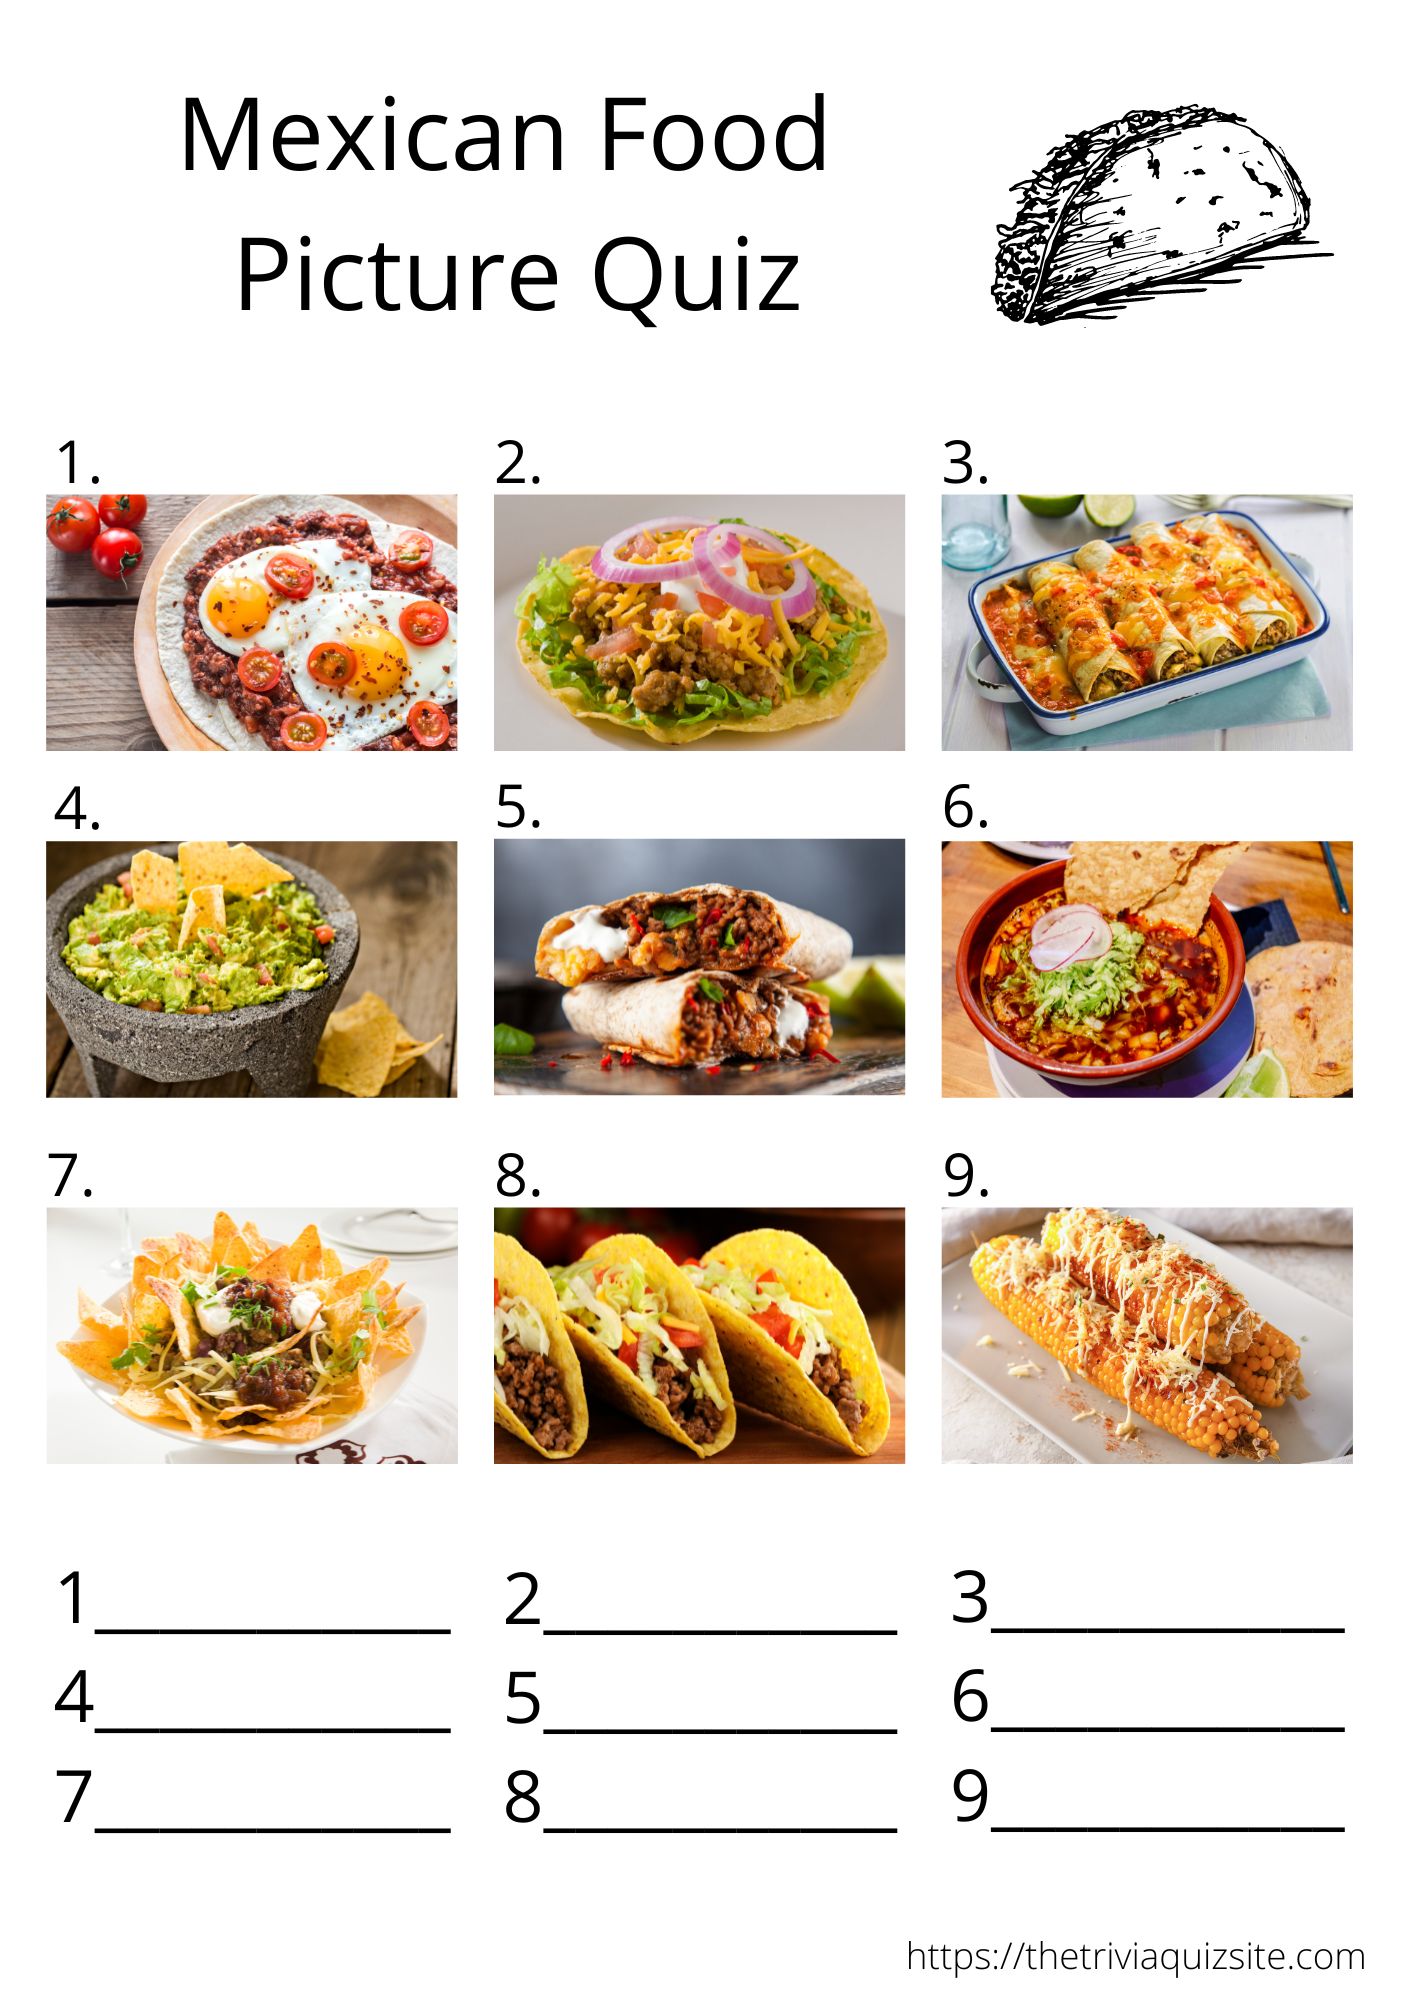 Mexican Food picture quiz